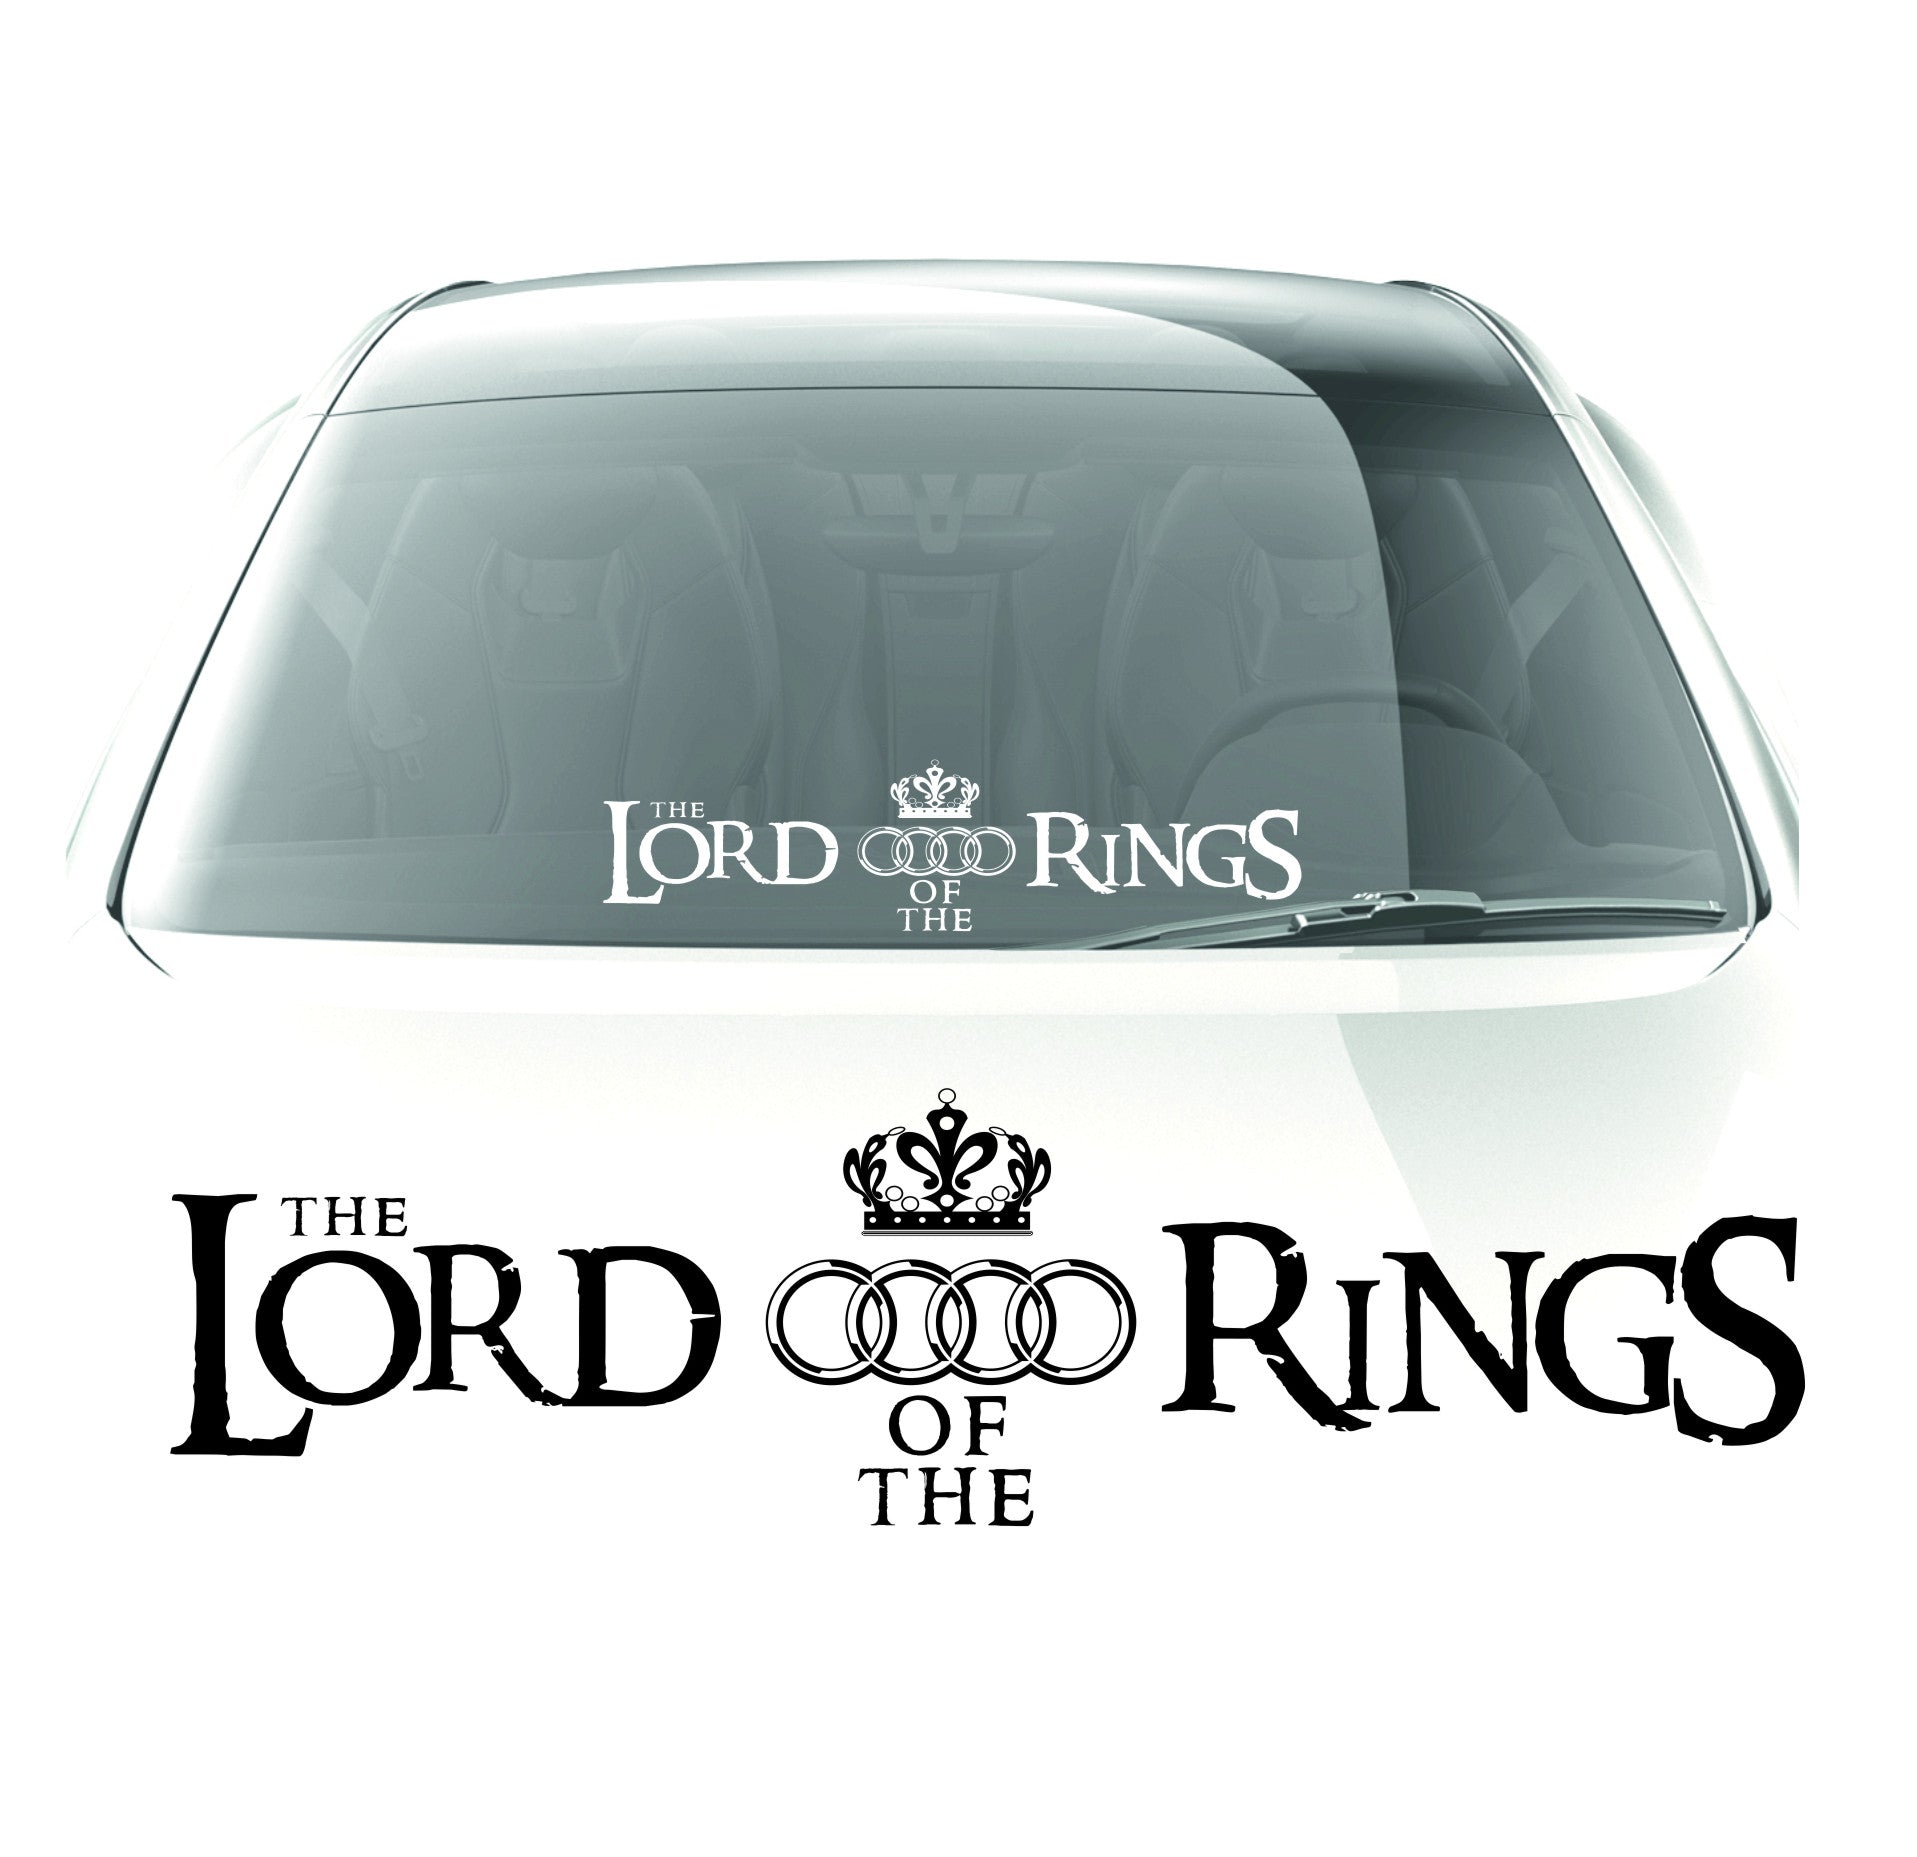 Audi lord of the rings sticker